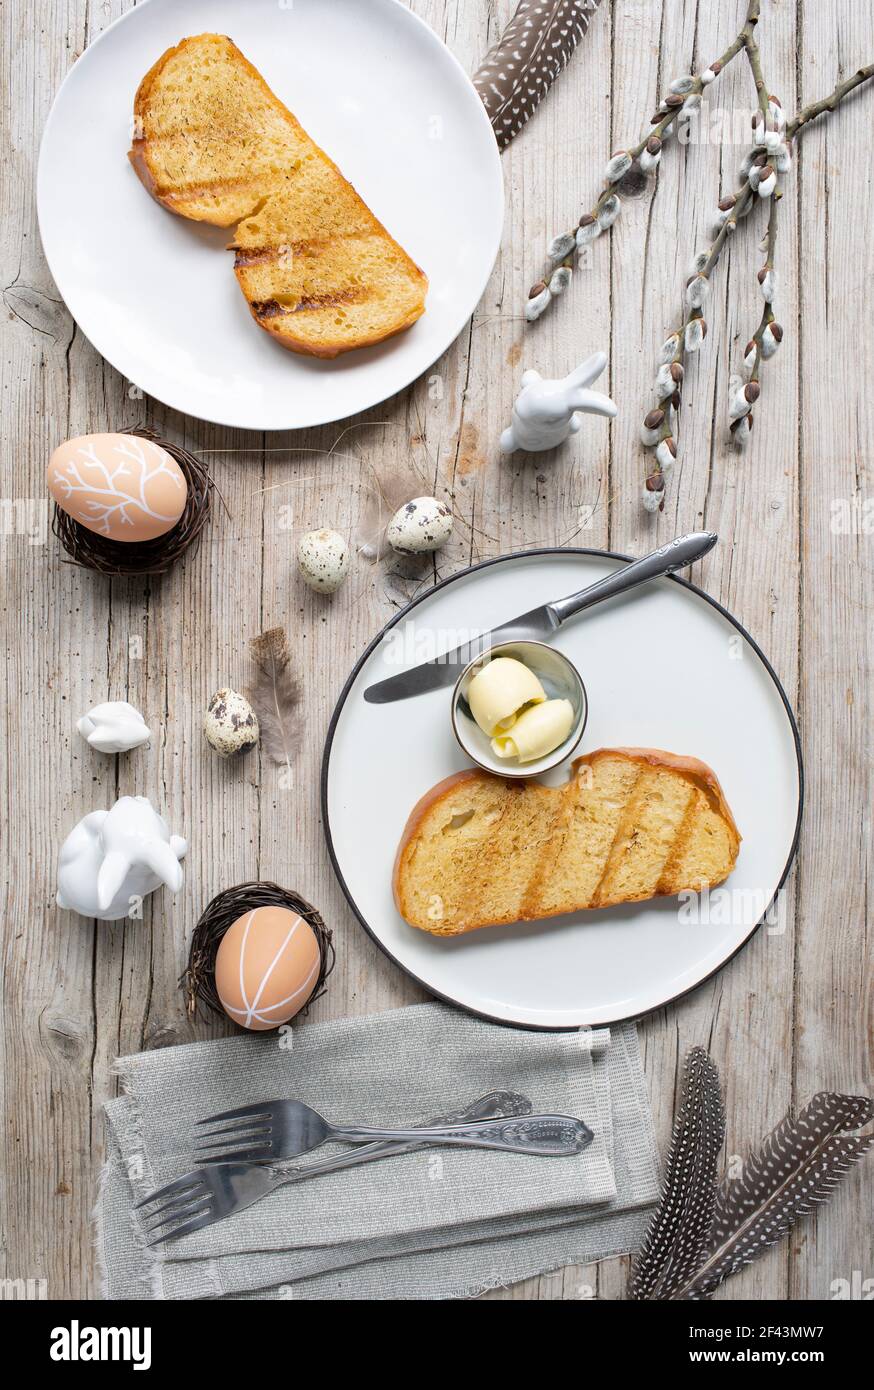 Easter breakfast with golden toasted Easter striezel or also Easter bread with butter with Easter decoration on light wooden background Stock Photo